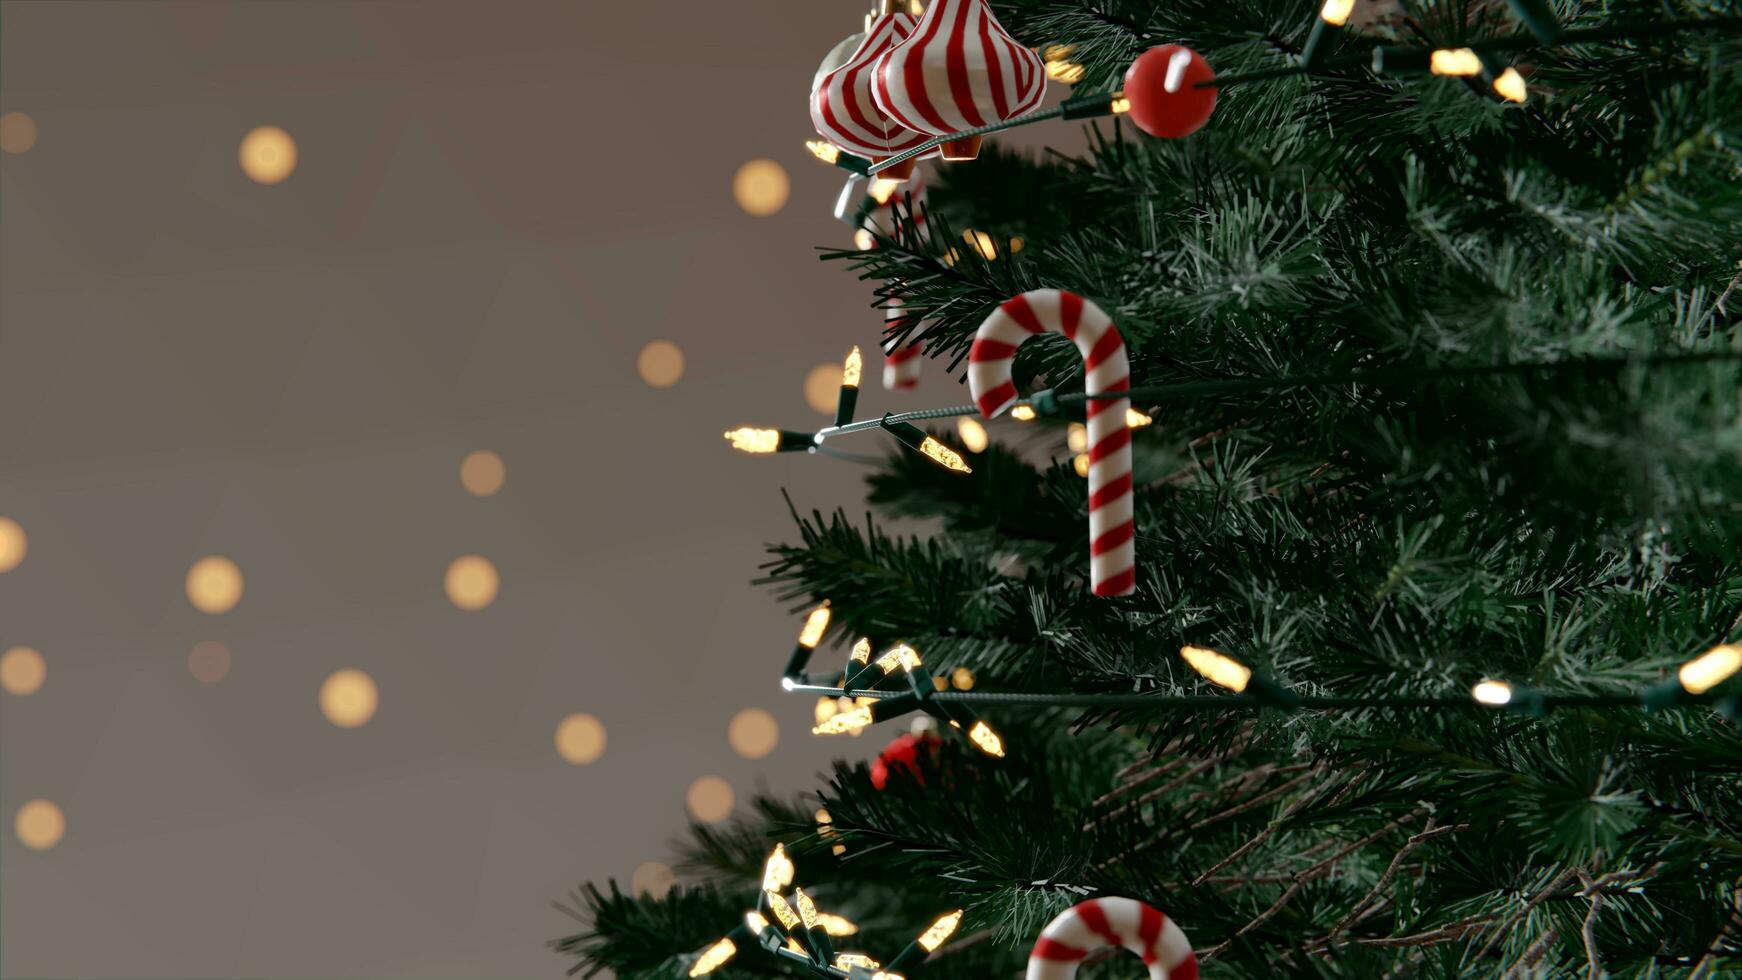 3d artwork ,christmas tree decoration with light, glass ball and red ornaments on background bokeh of side flickering light bulbs garlands for family winter holiday. 8k resolution photo